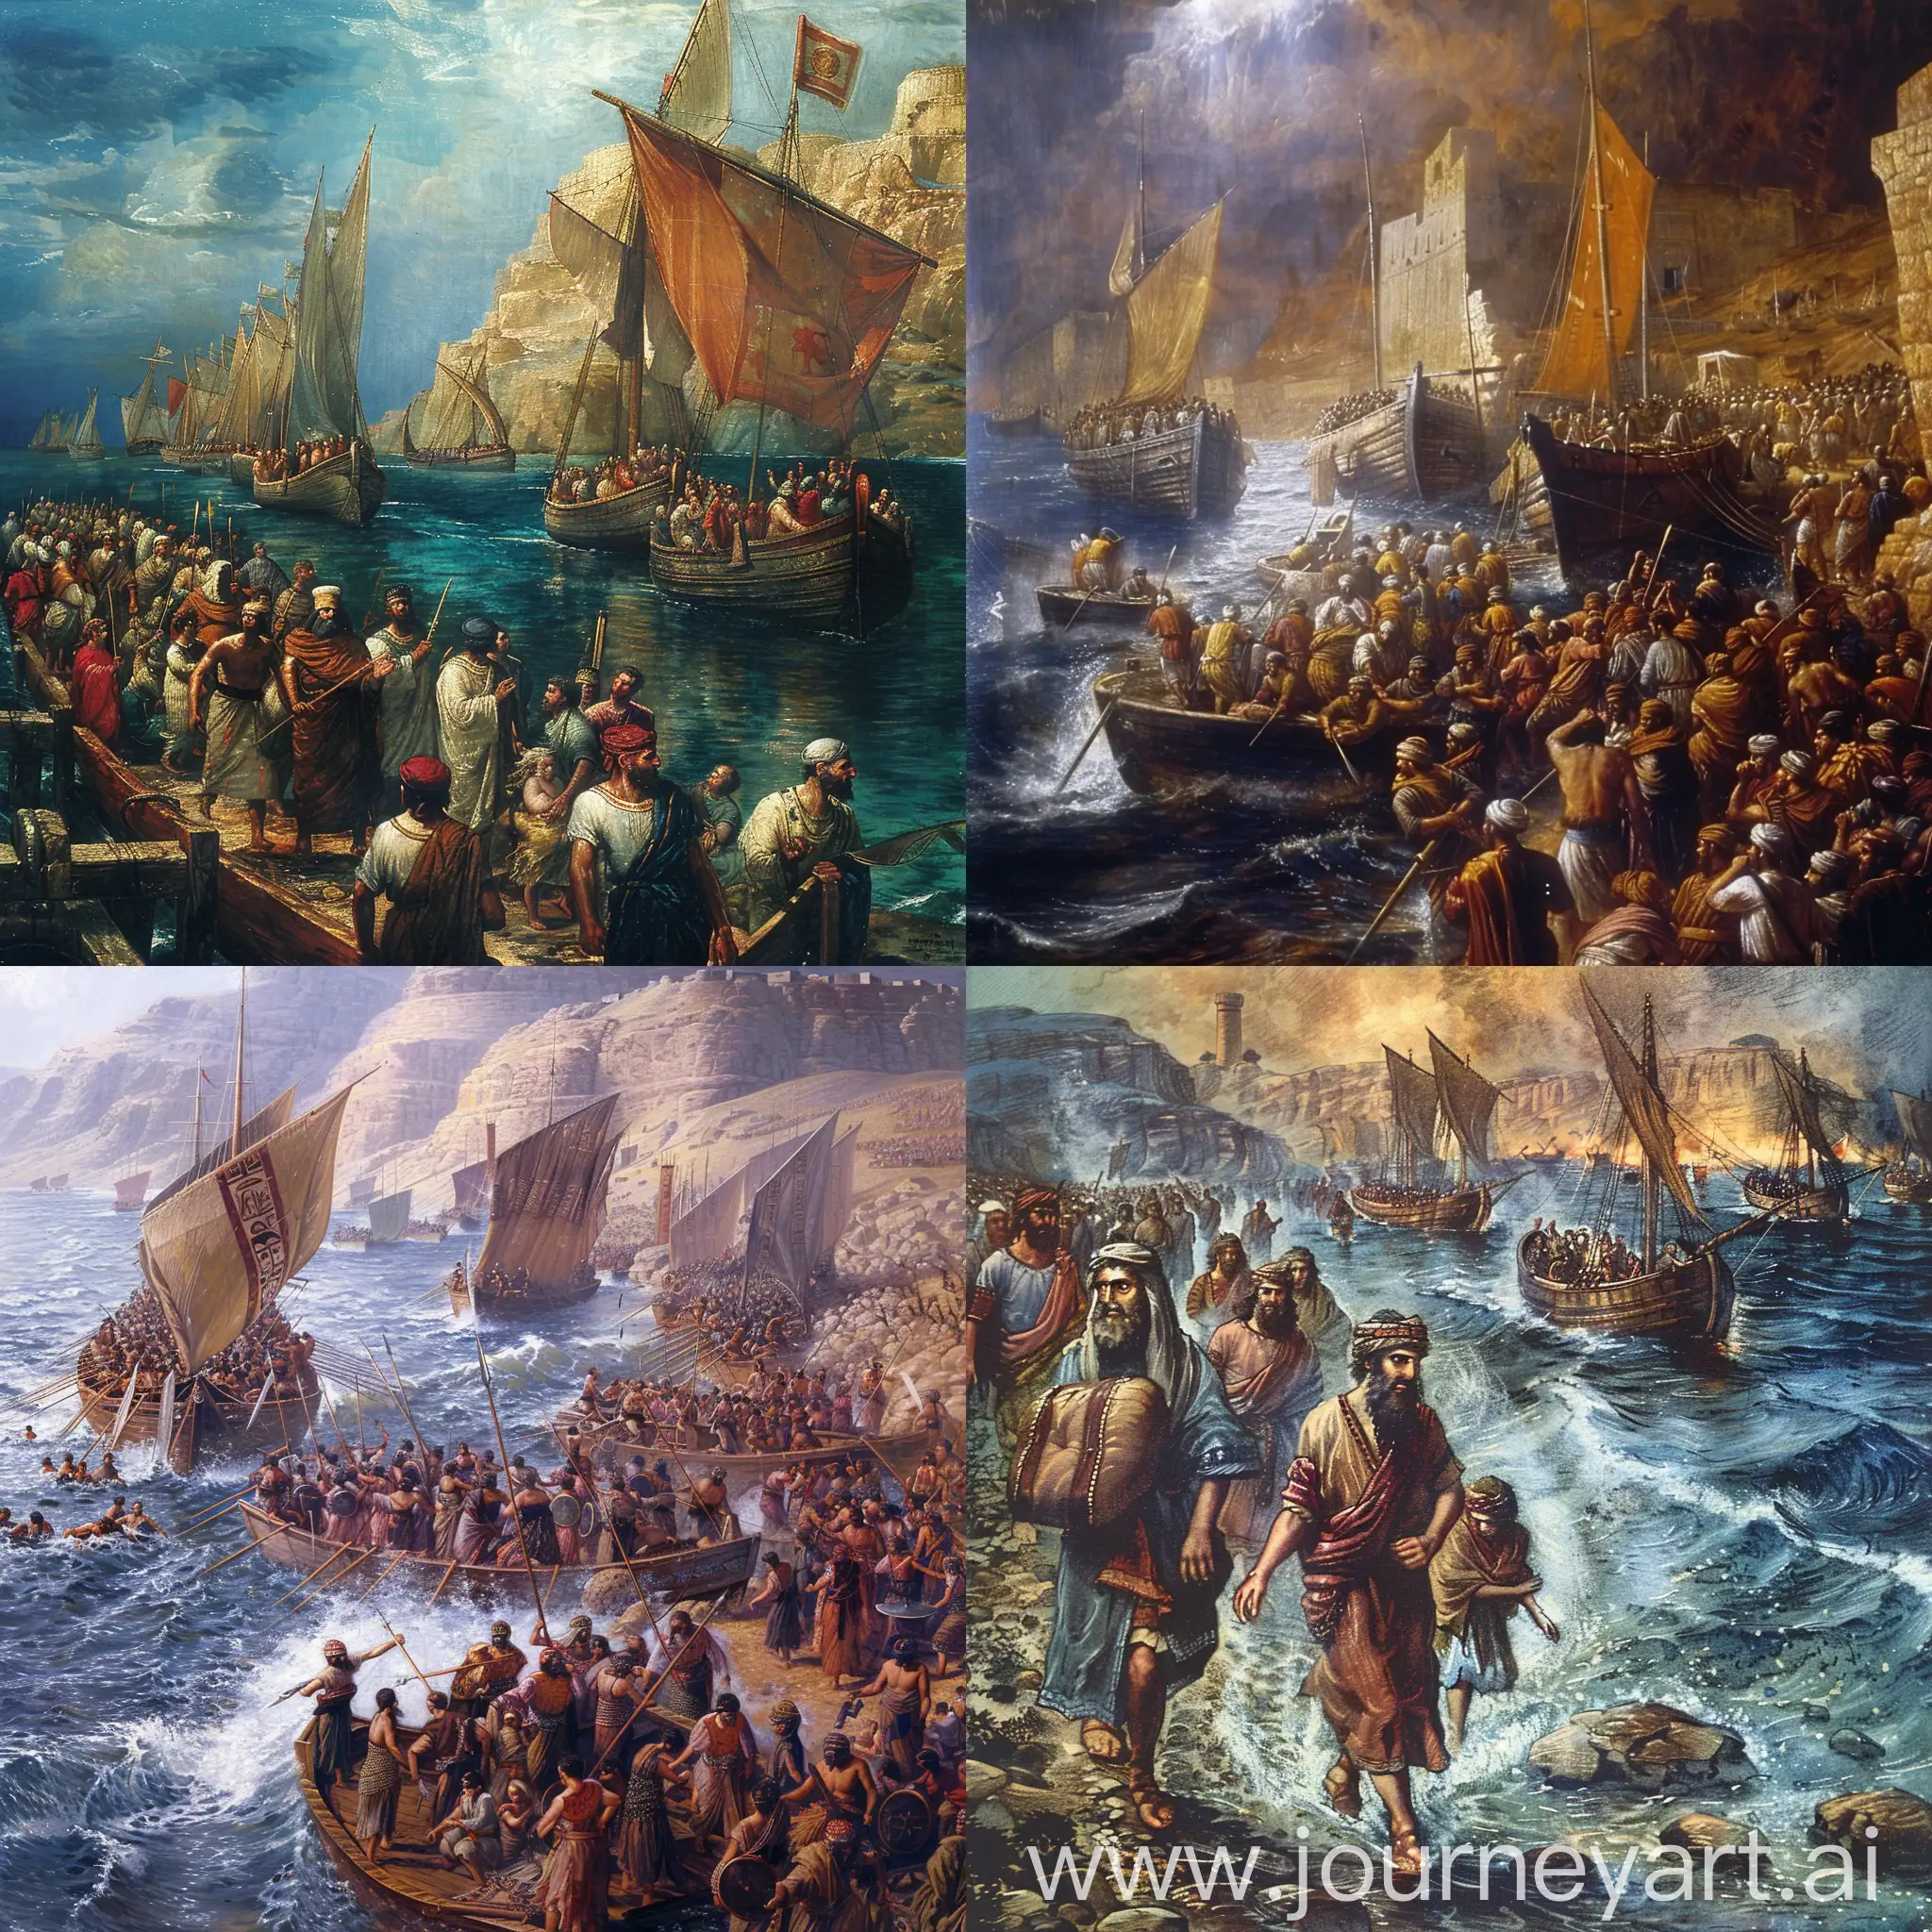 Exodus-of-the-Israelites-Departure-from-Egypt-by-Ships